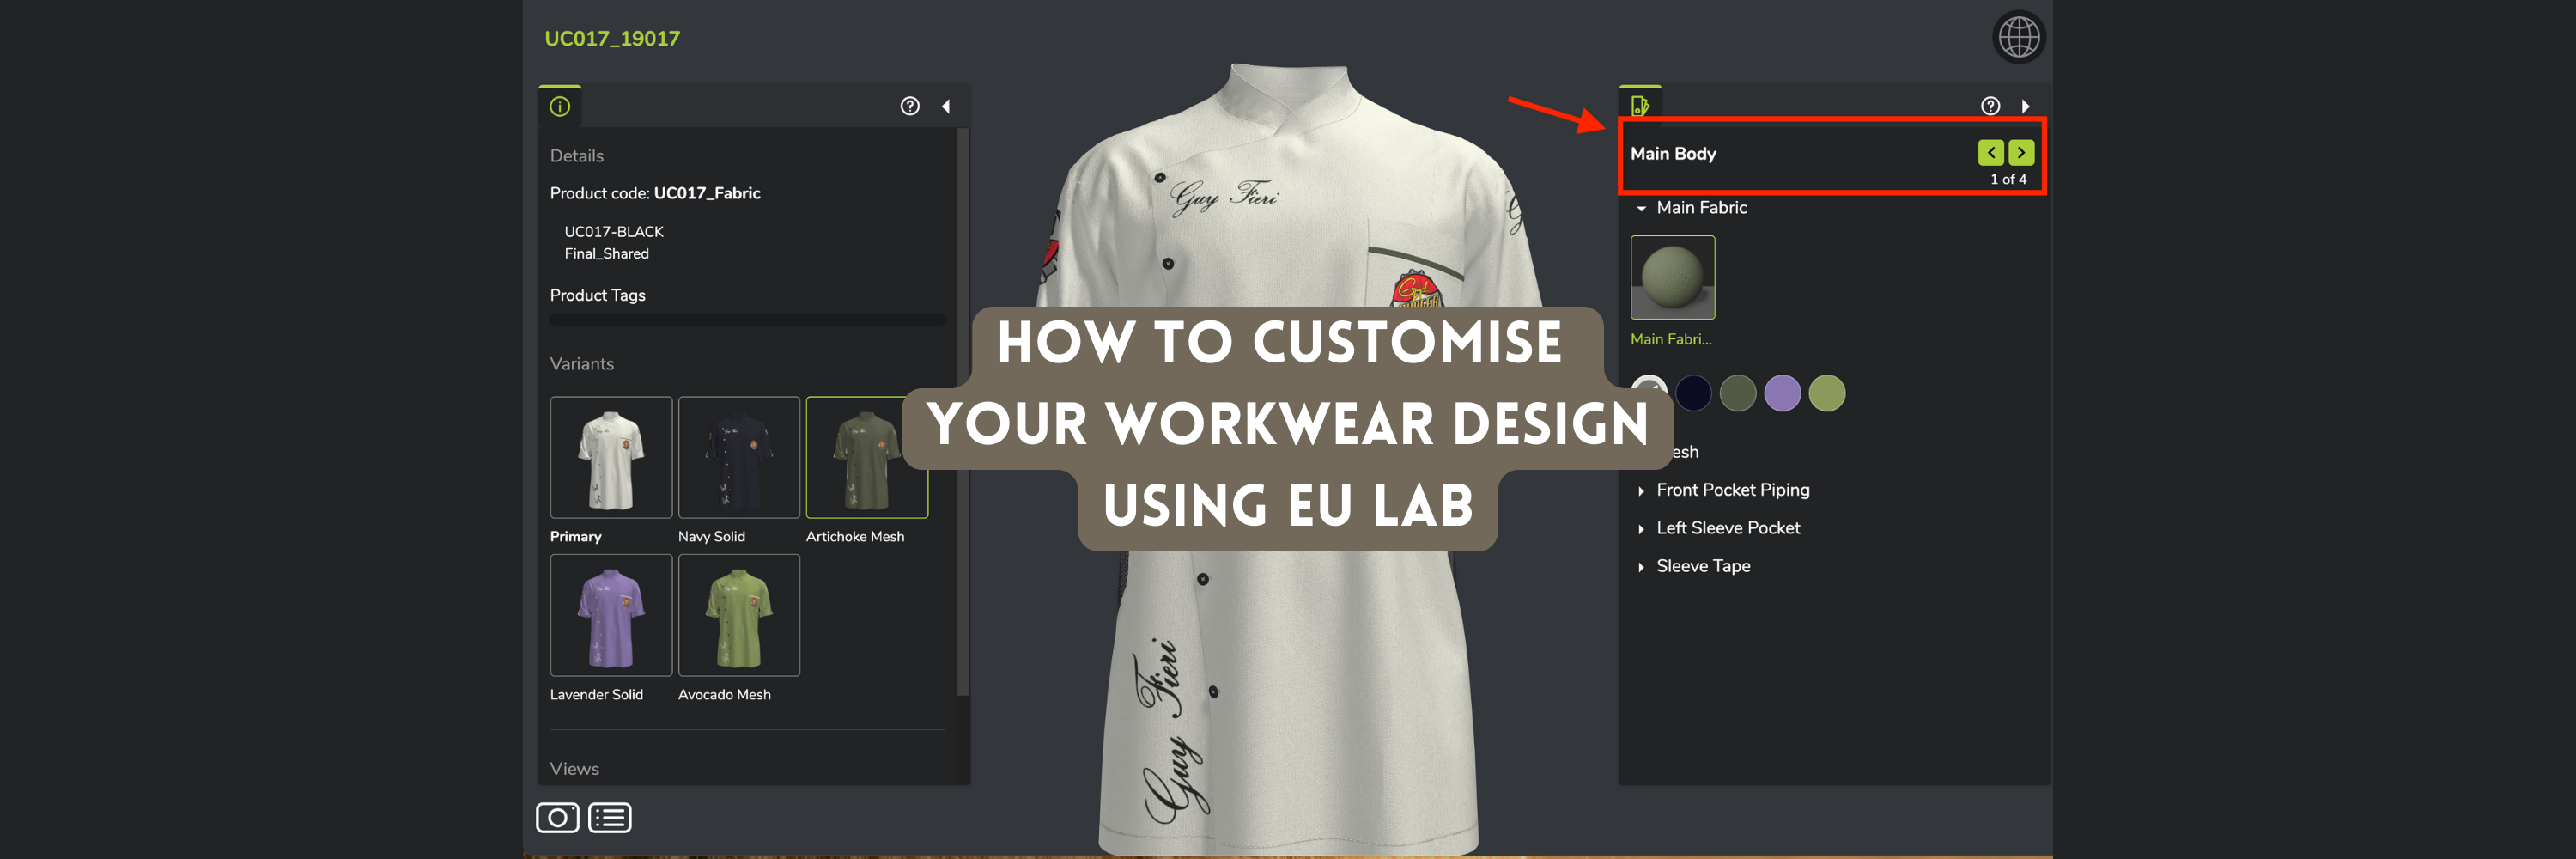 How to Customise Your Workwear Design Using EU Lab